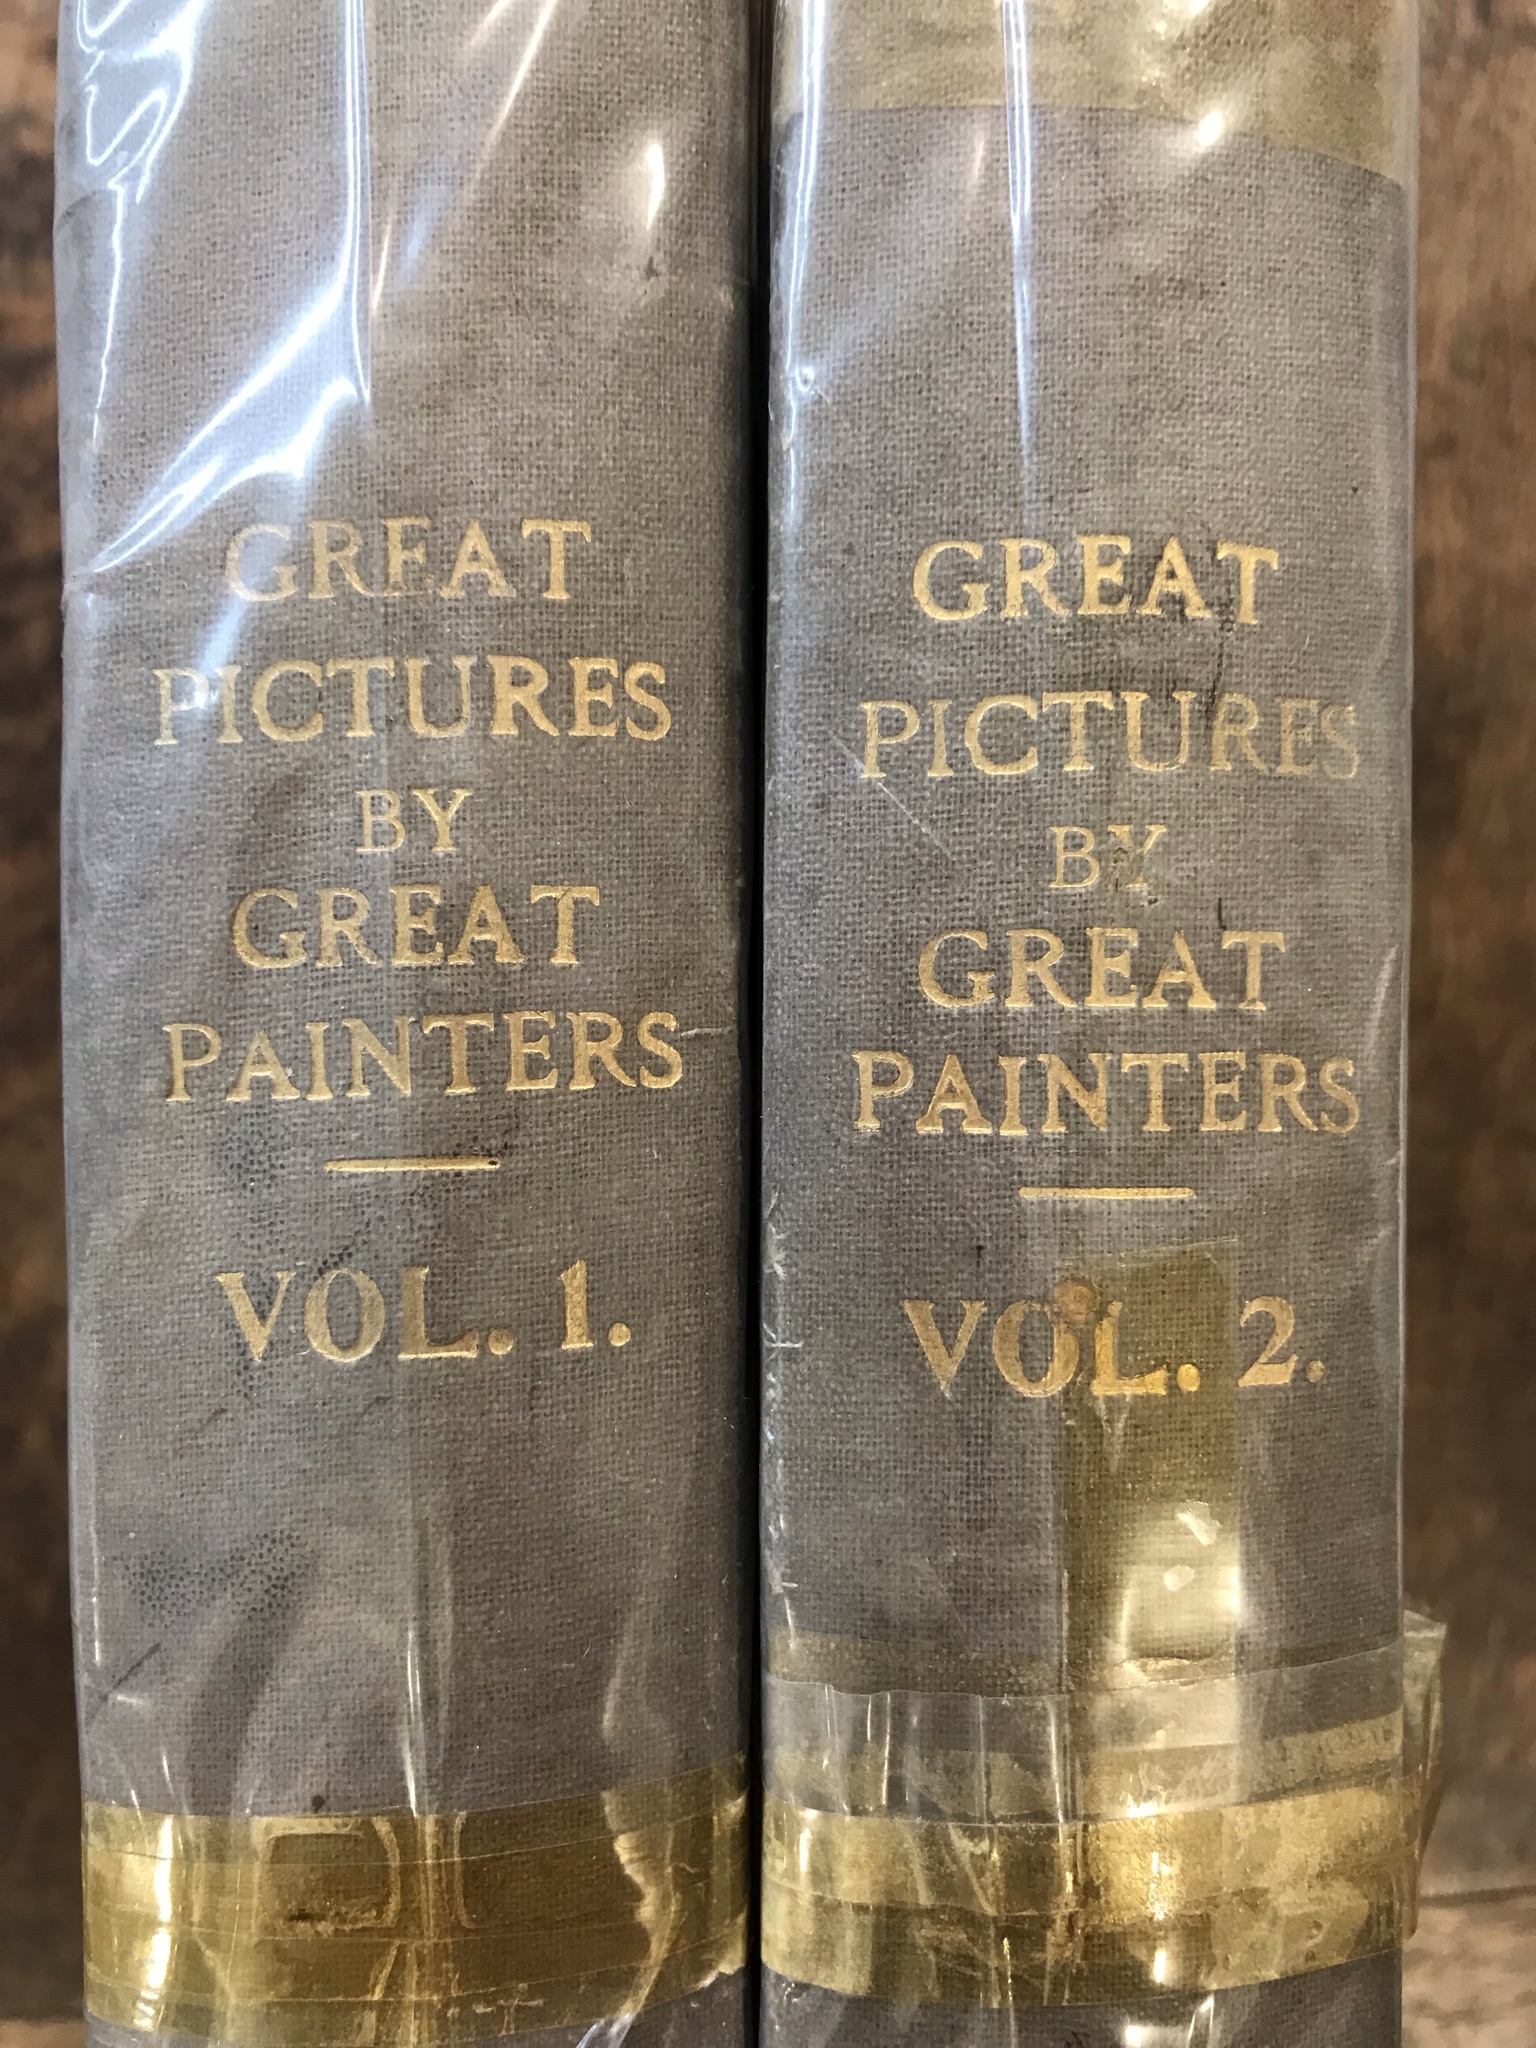 Great Pictures by Great Painters Volumes 1 and 2, features paintings from the Public Galleries of - Image 3 of 4